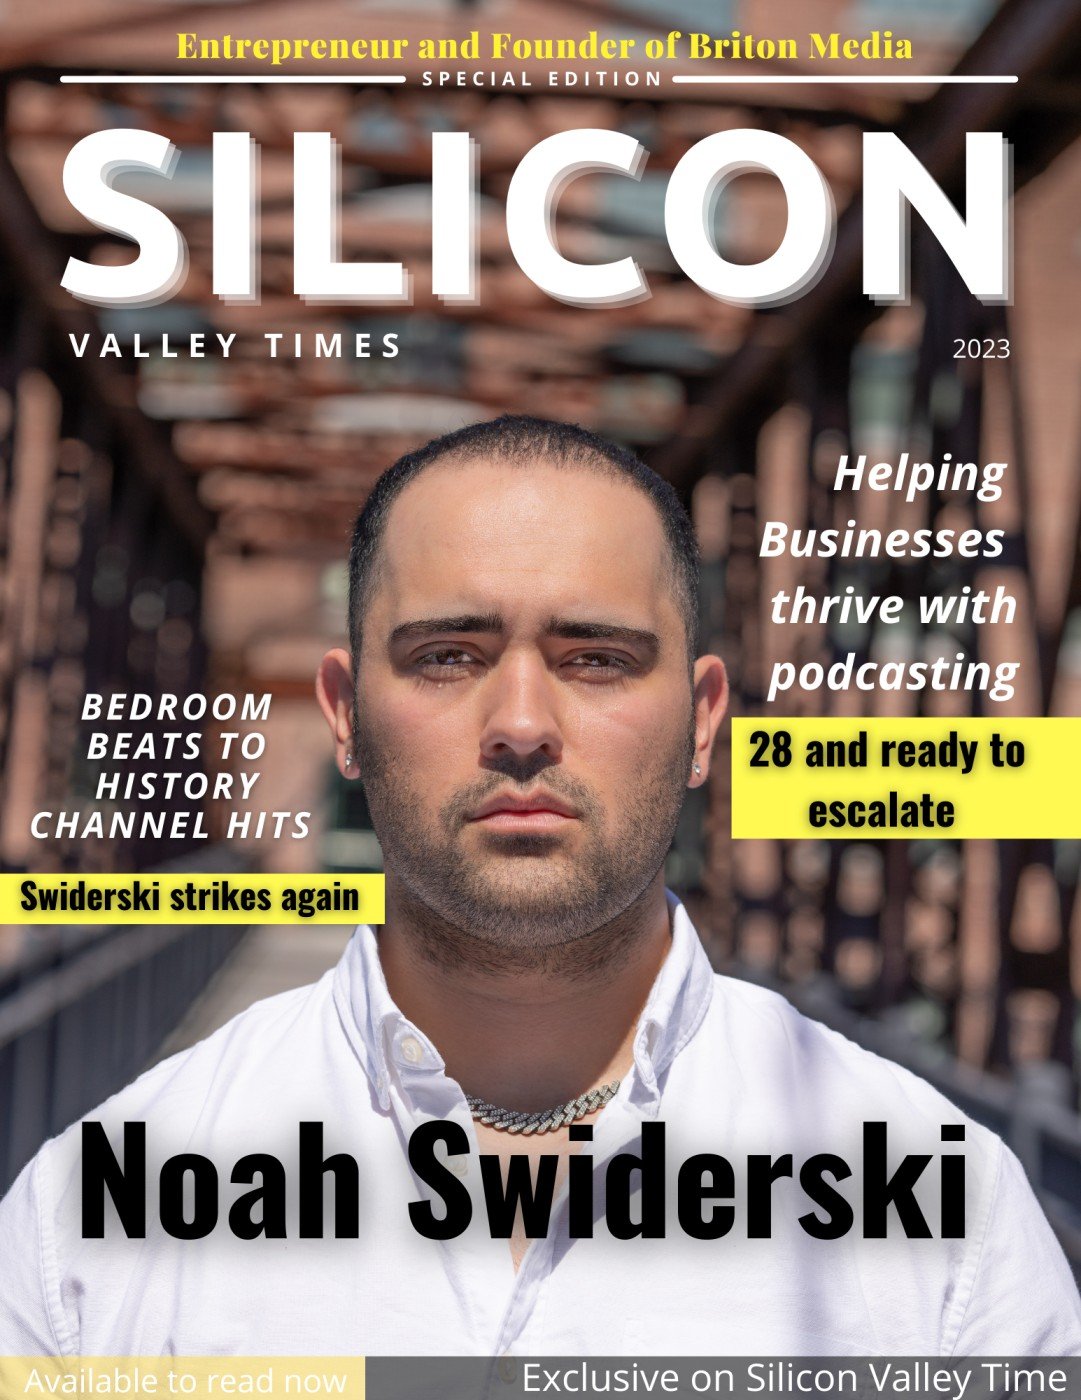 Exclusive interview with Noah Swiderski, Entrepreneur and Founder of Briton Media